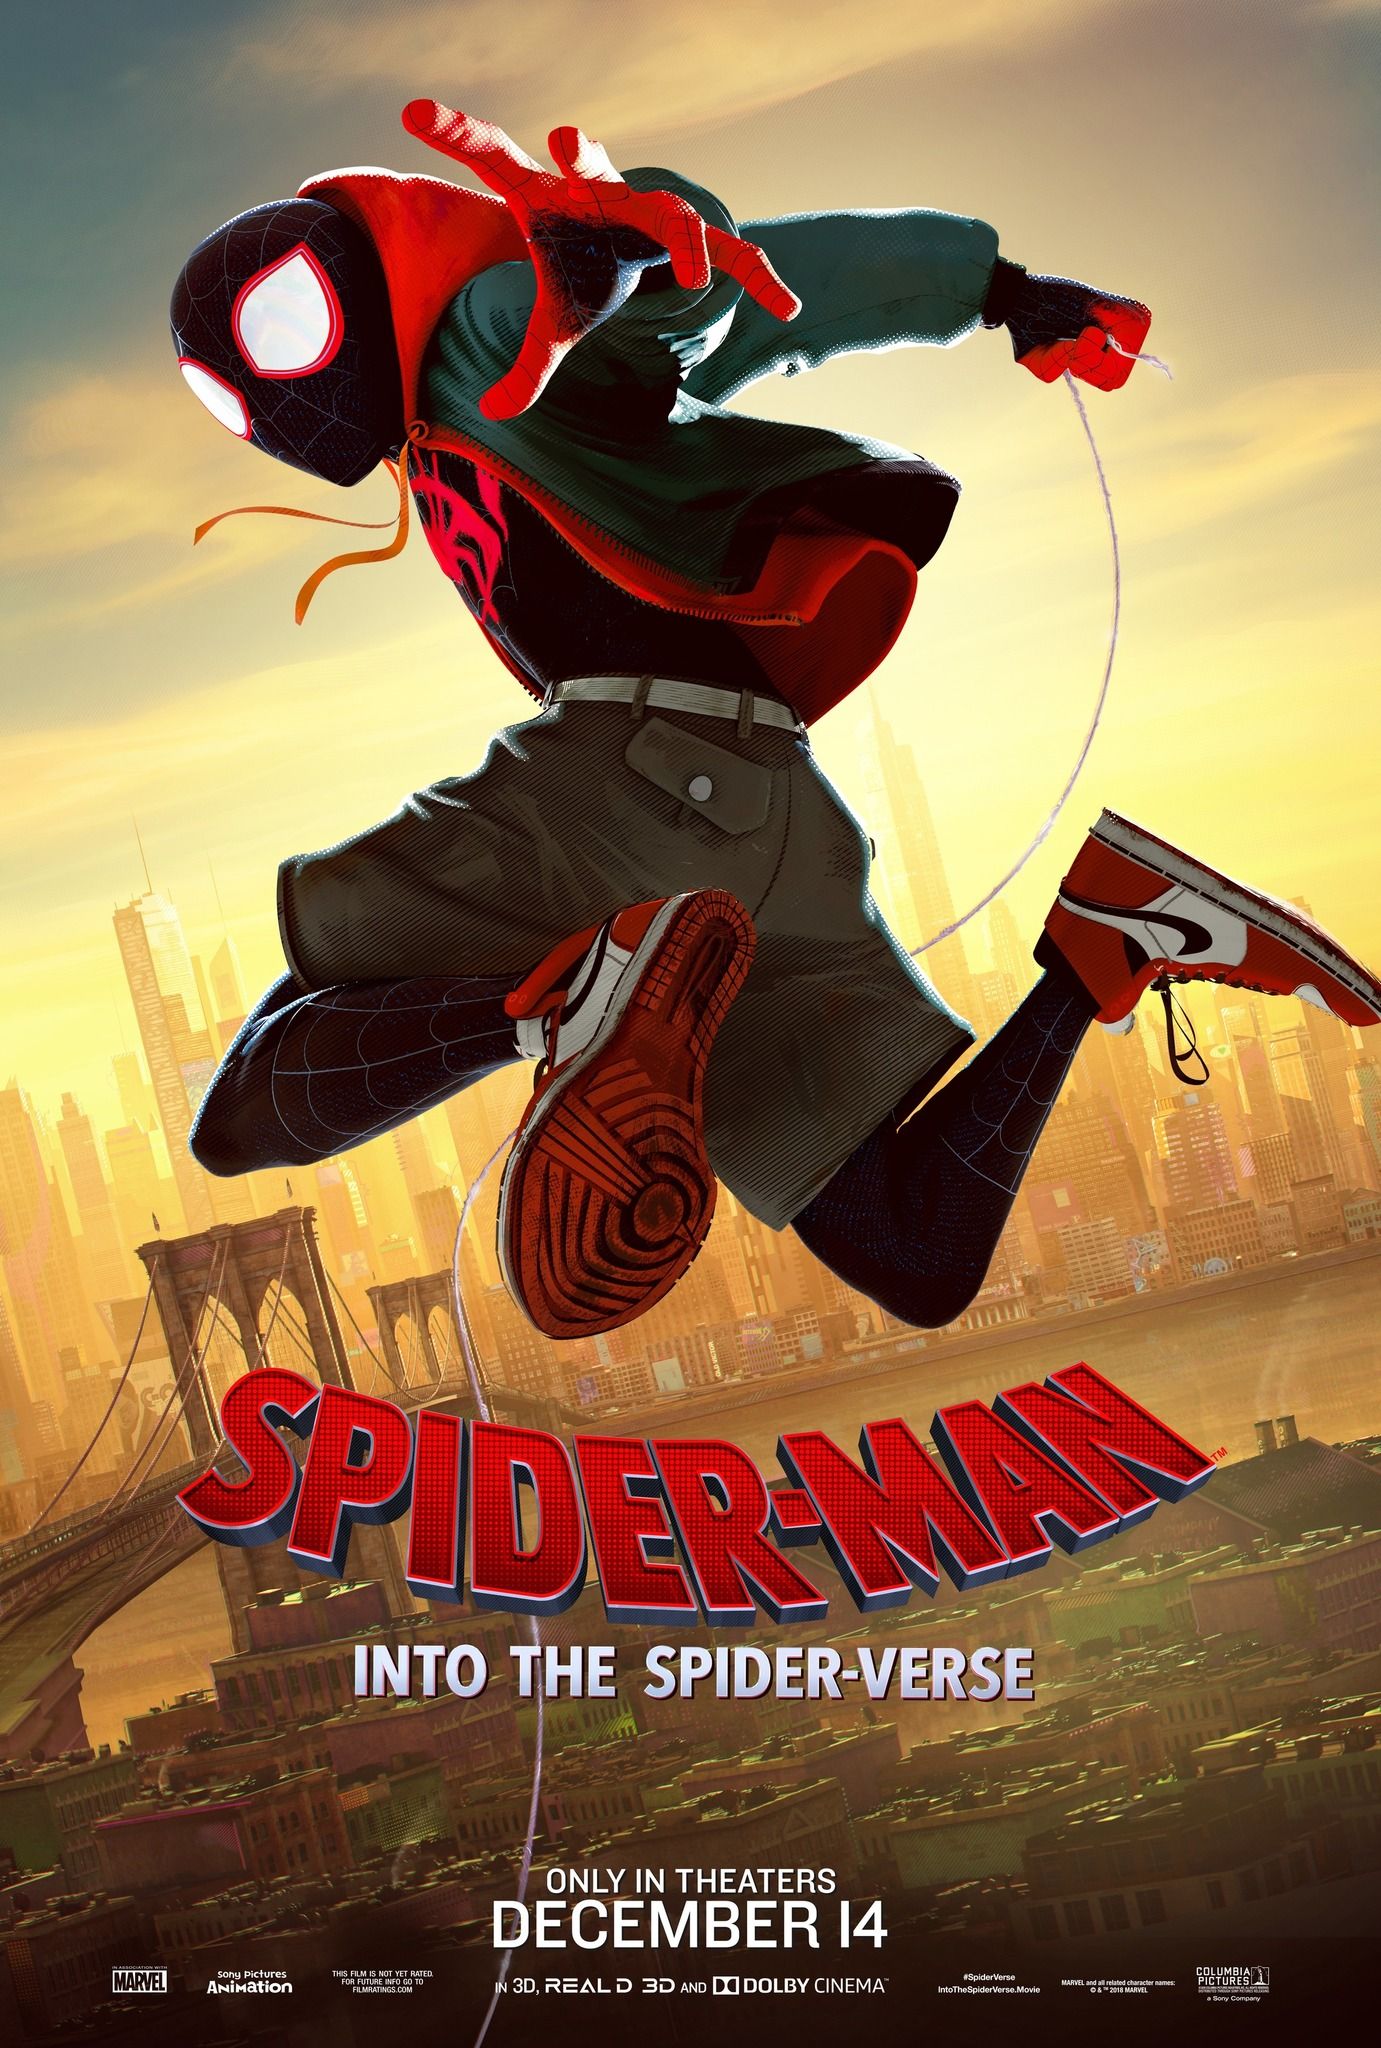 Spider-Man Into the Spider-Verse (2018) Hindi Dubbed ORG HDRip Full Movie 720p 480p